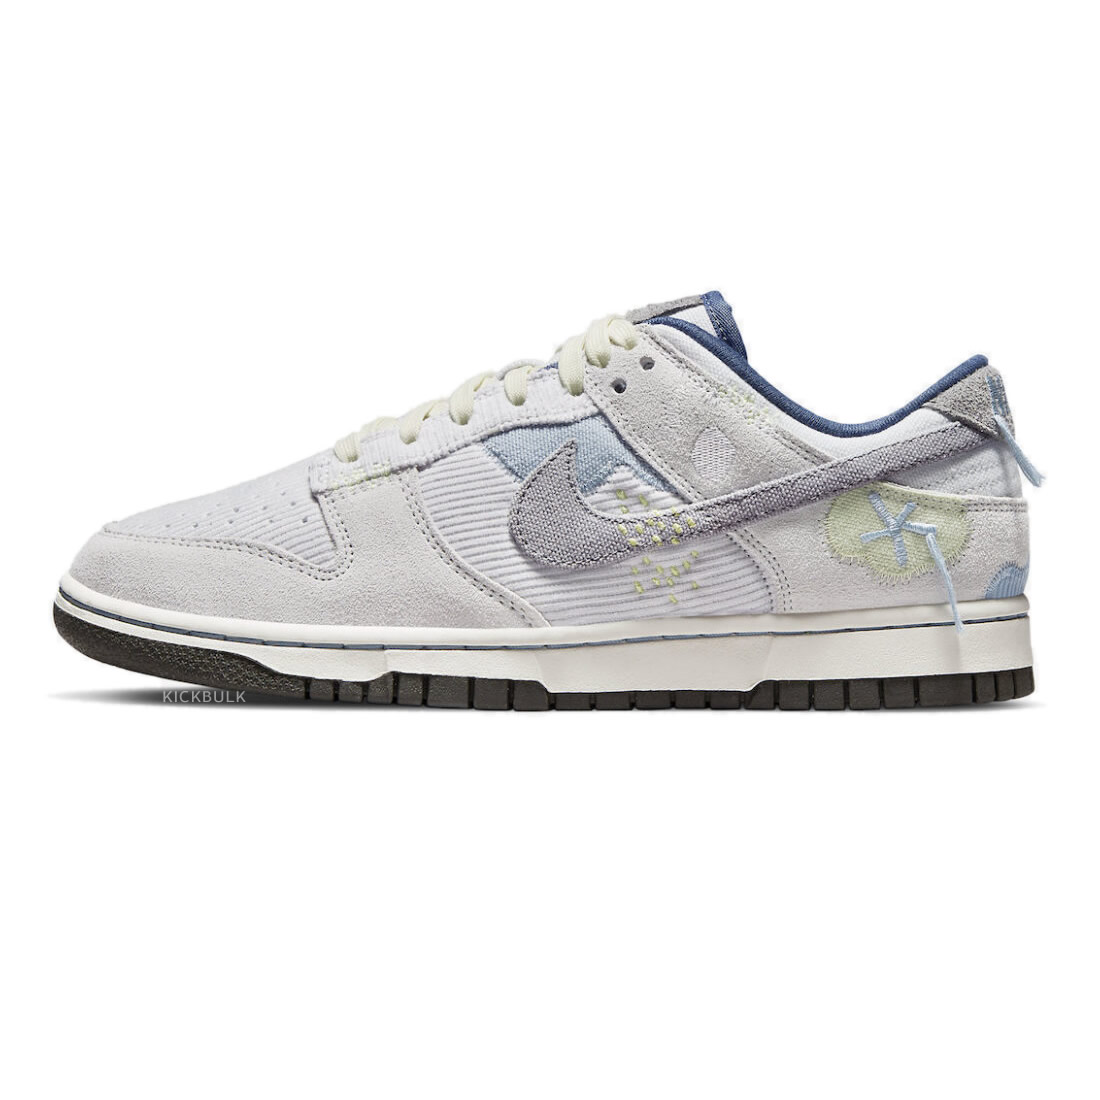 Nike Dunk Low On The Bright Side Photon Dust Wmns Dq5076 001 1 - kickbulk.co